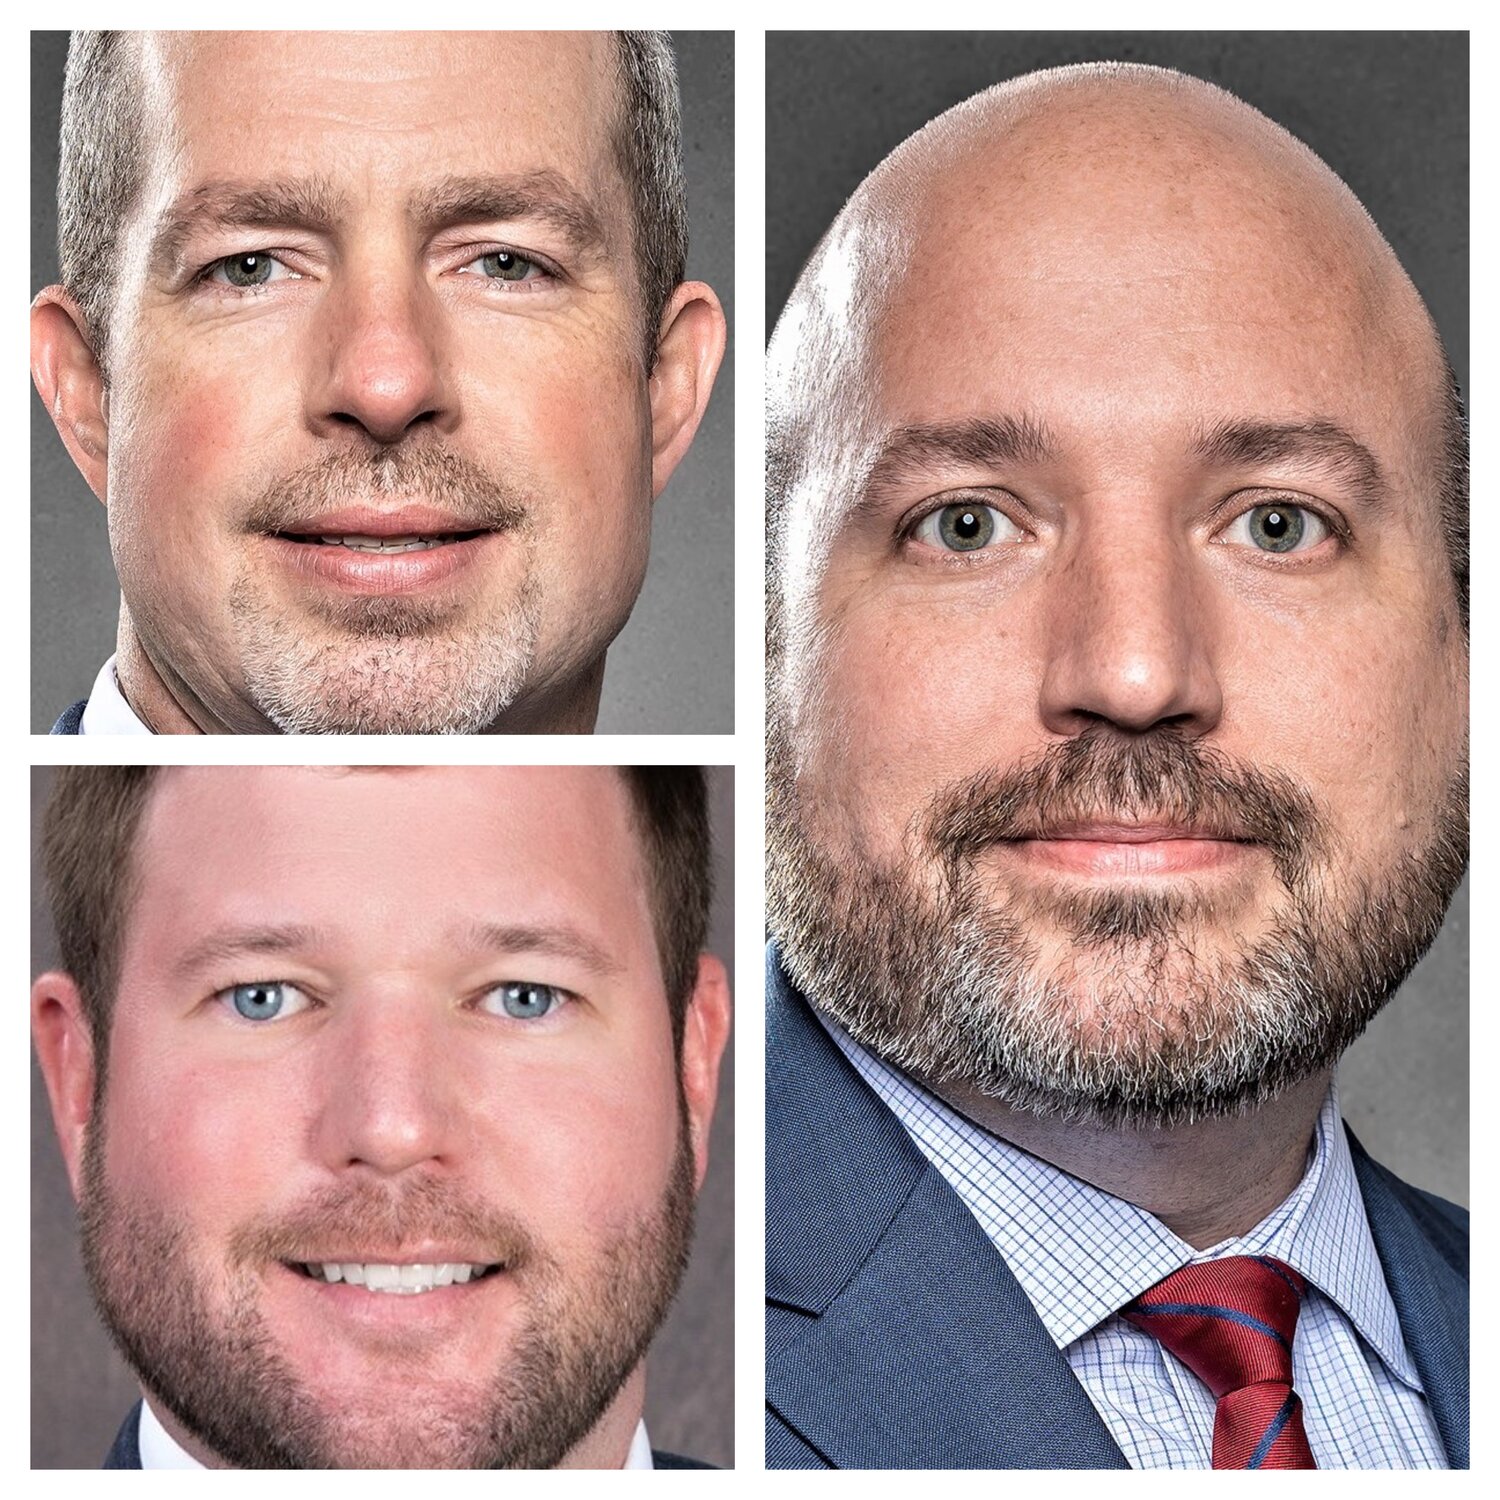 Clockwise from top left: Chris Tart was named president of Hoke Hospital in August; Michael Tart is the new president of Highsmith-Rainey Specialty Hospital; and Stephen Fife vice president of ambulatory services for Cape Fear Valley Health.